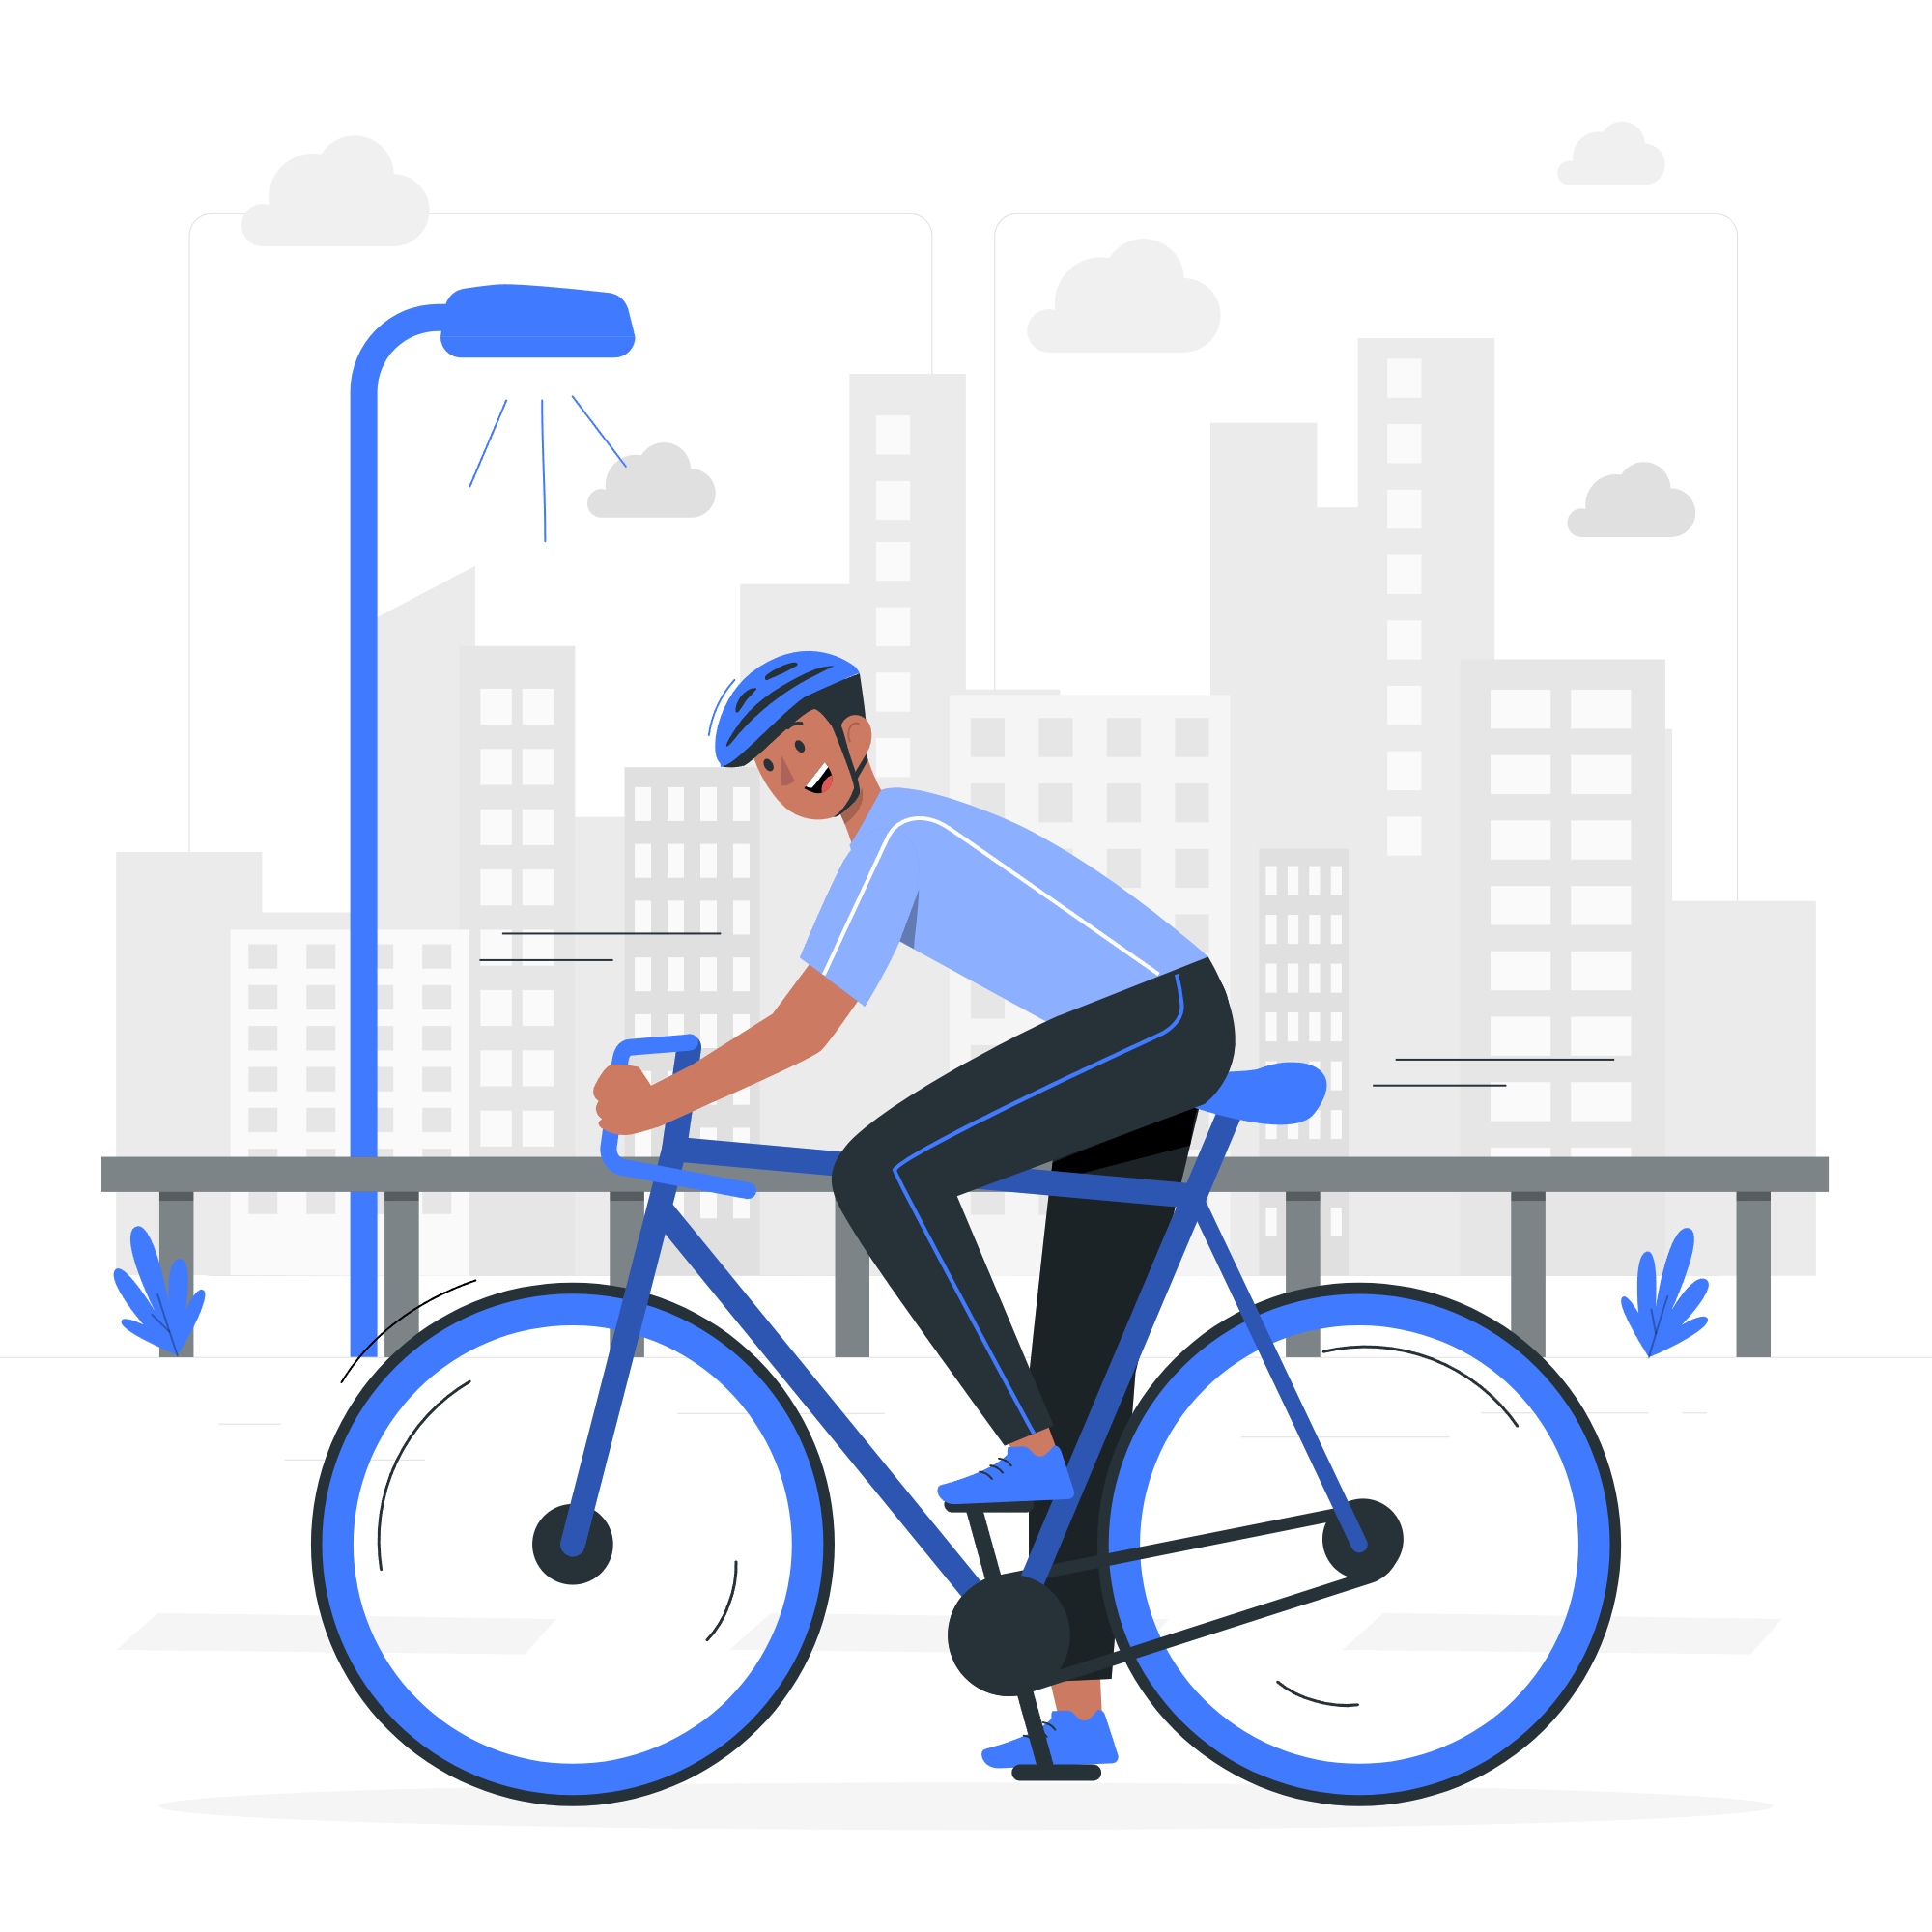 An Illustration of Cyclist